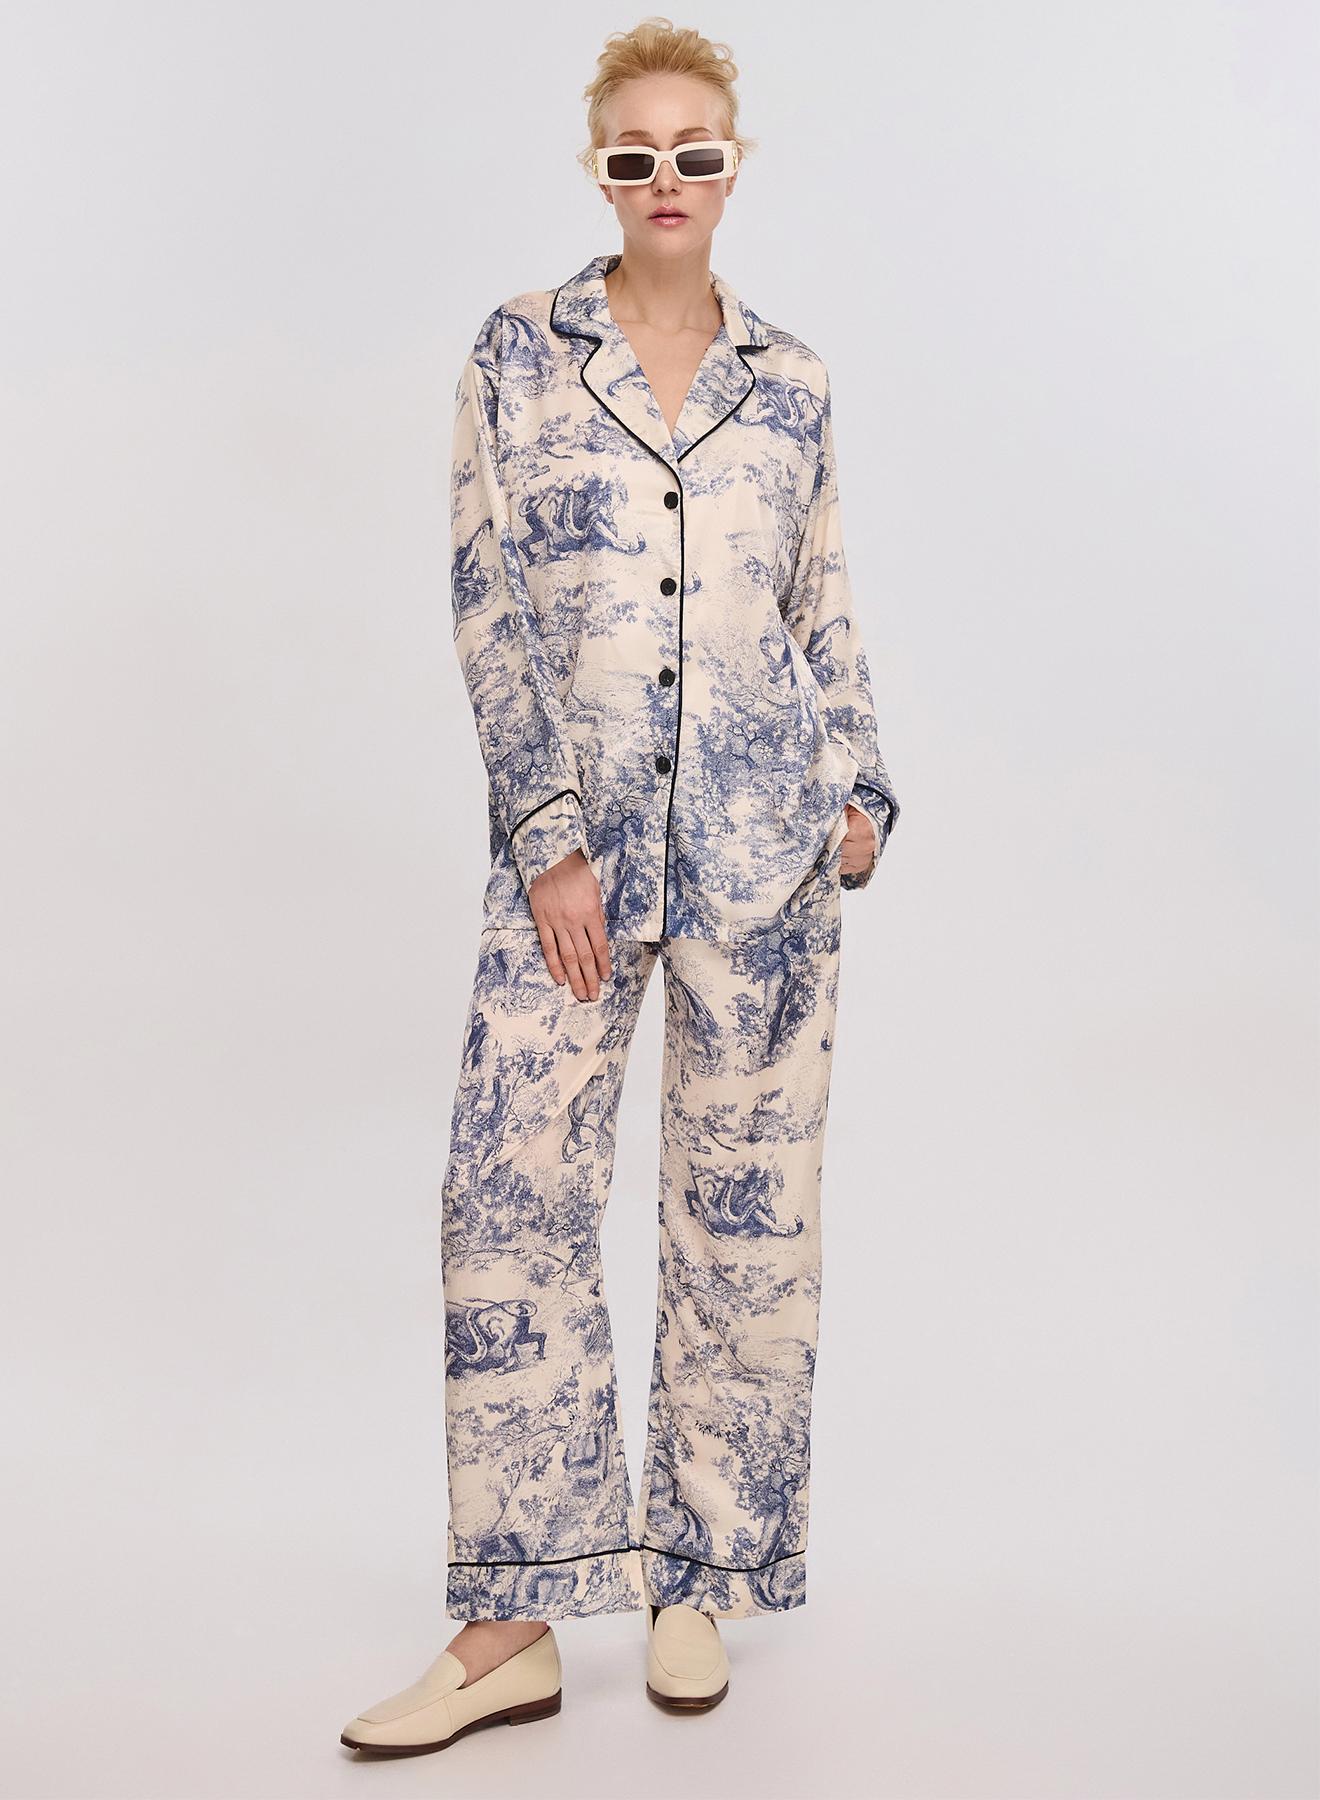 Vanilla/Light Blue silky touch Set Jacket-Trousers with print Lara - 1